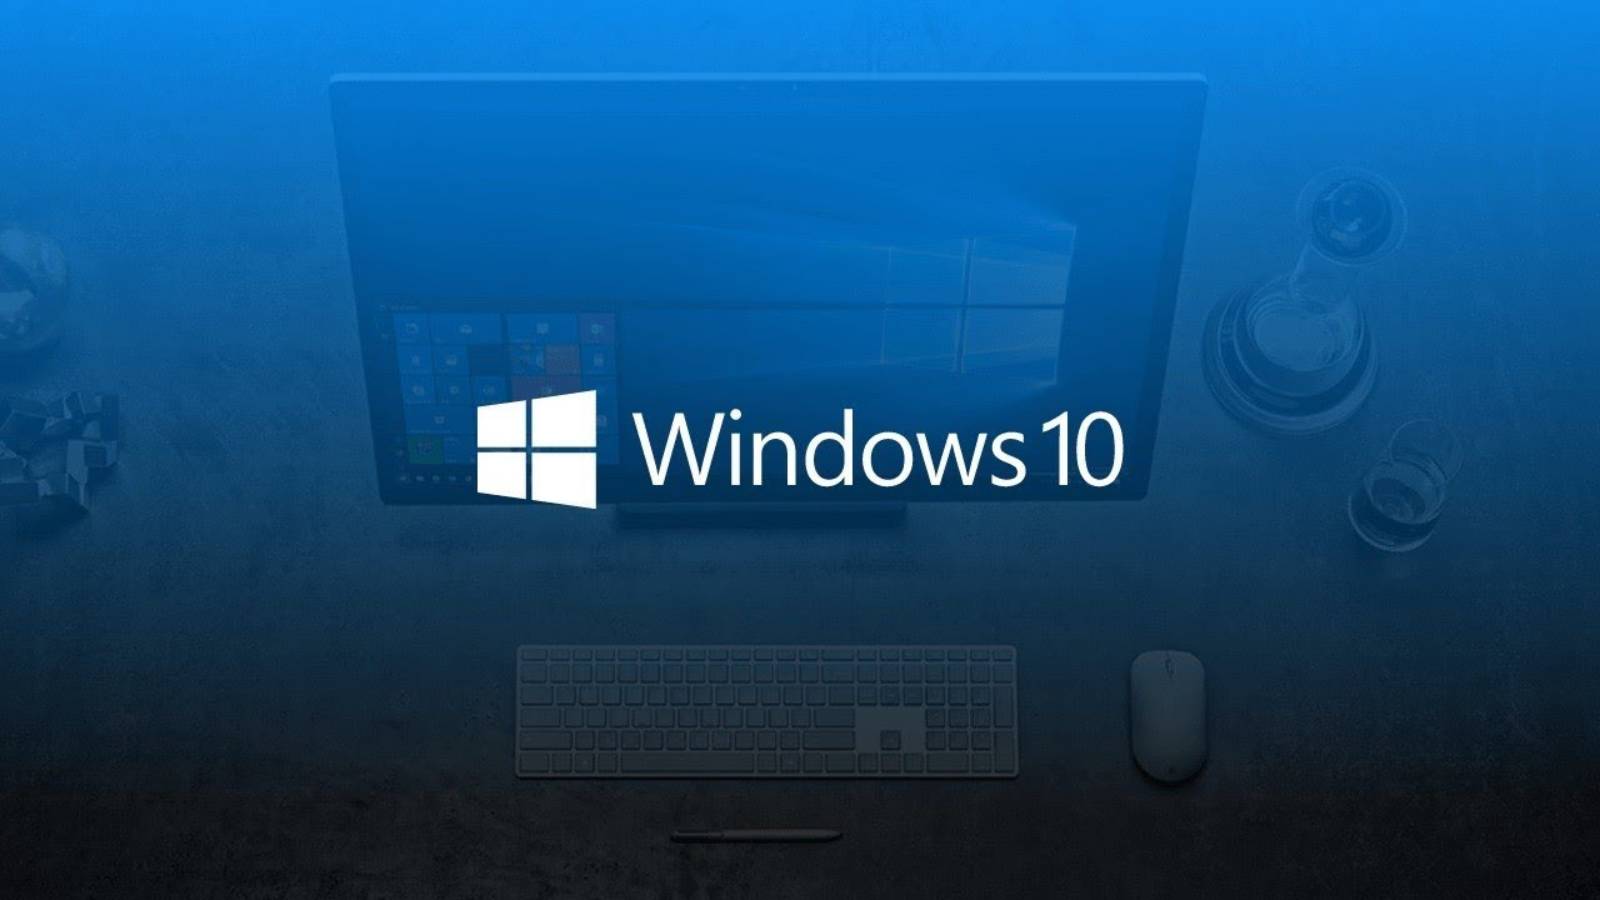 Windows 10 New Update that Solves PROBLEMS, brings Others